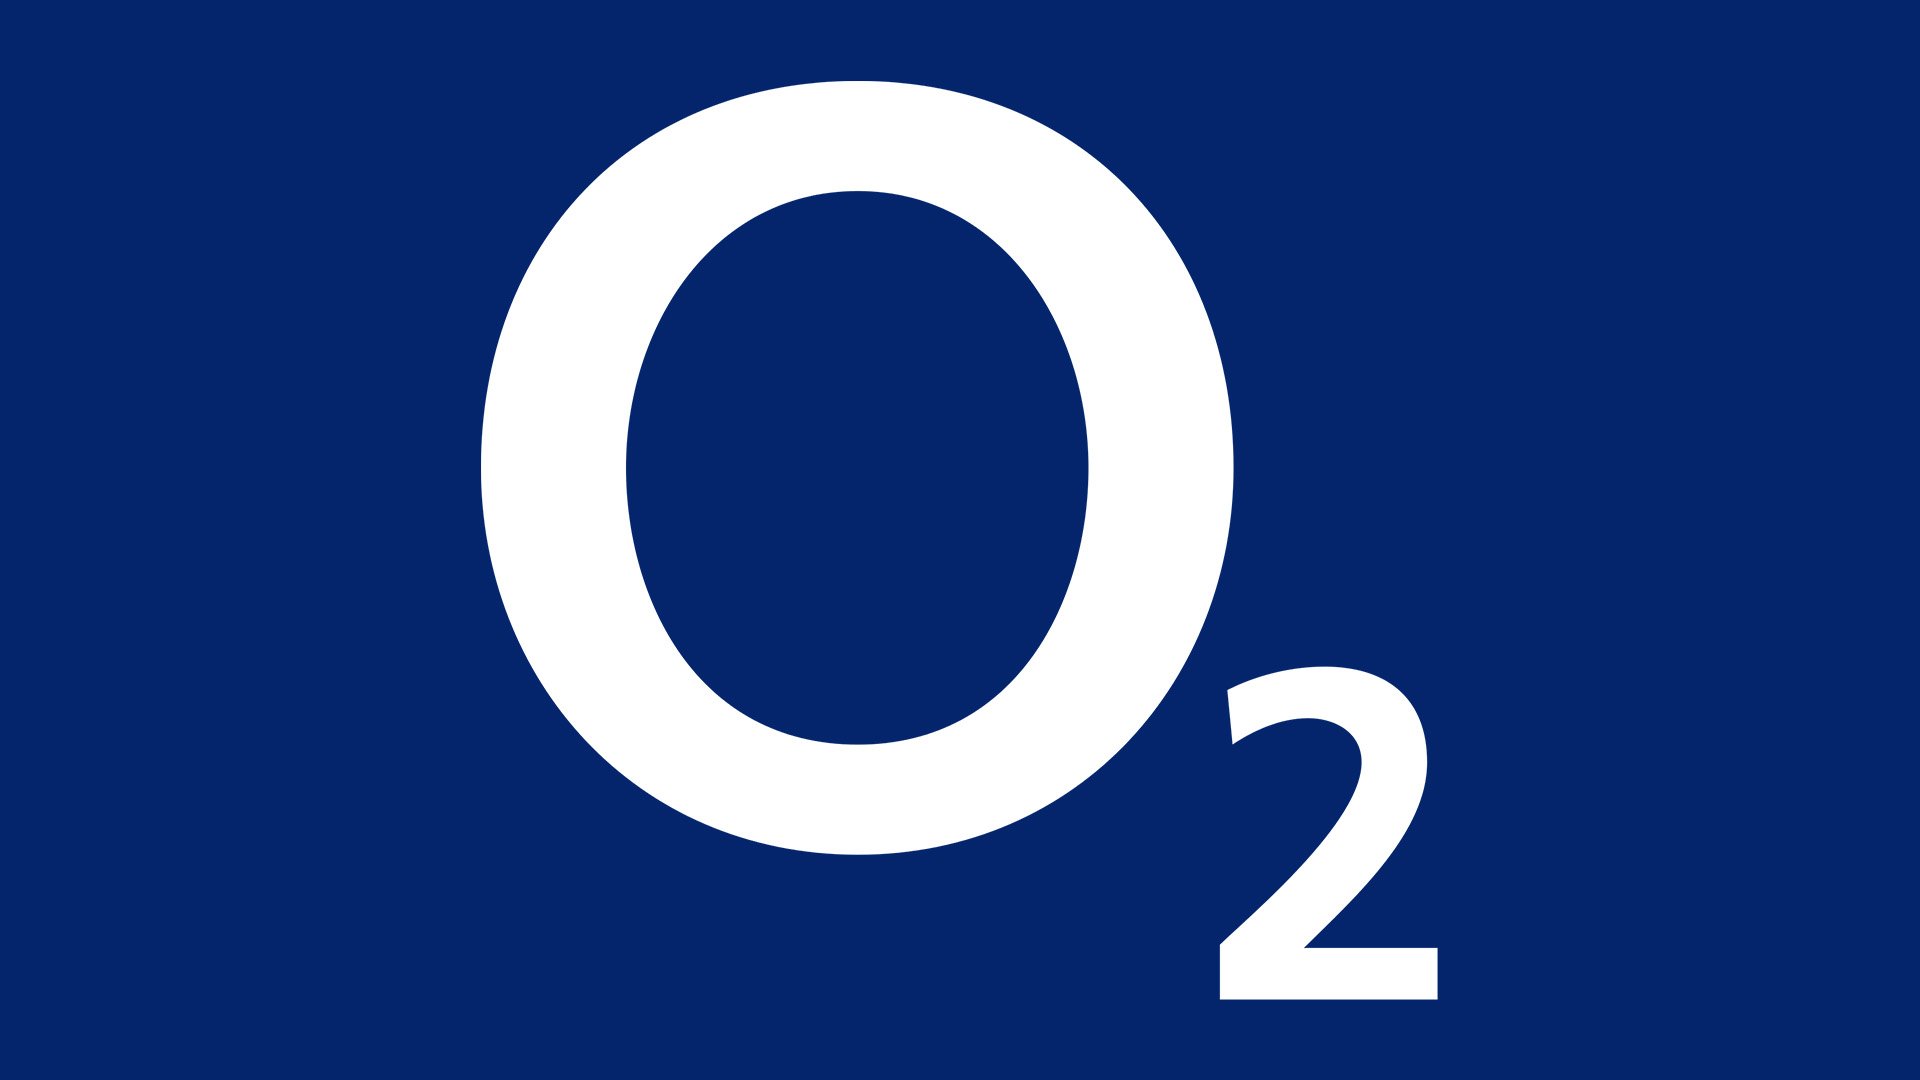 O2 offer packages with amazing benefits